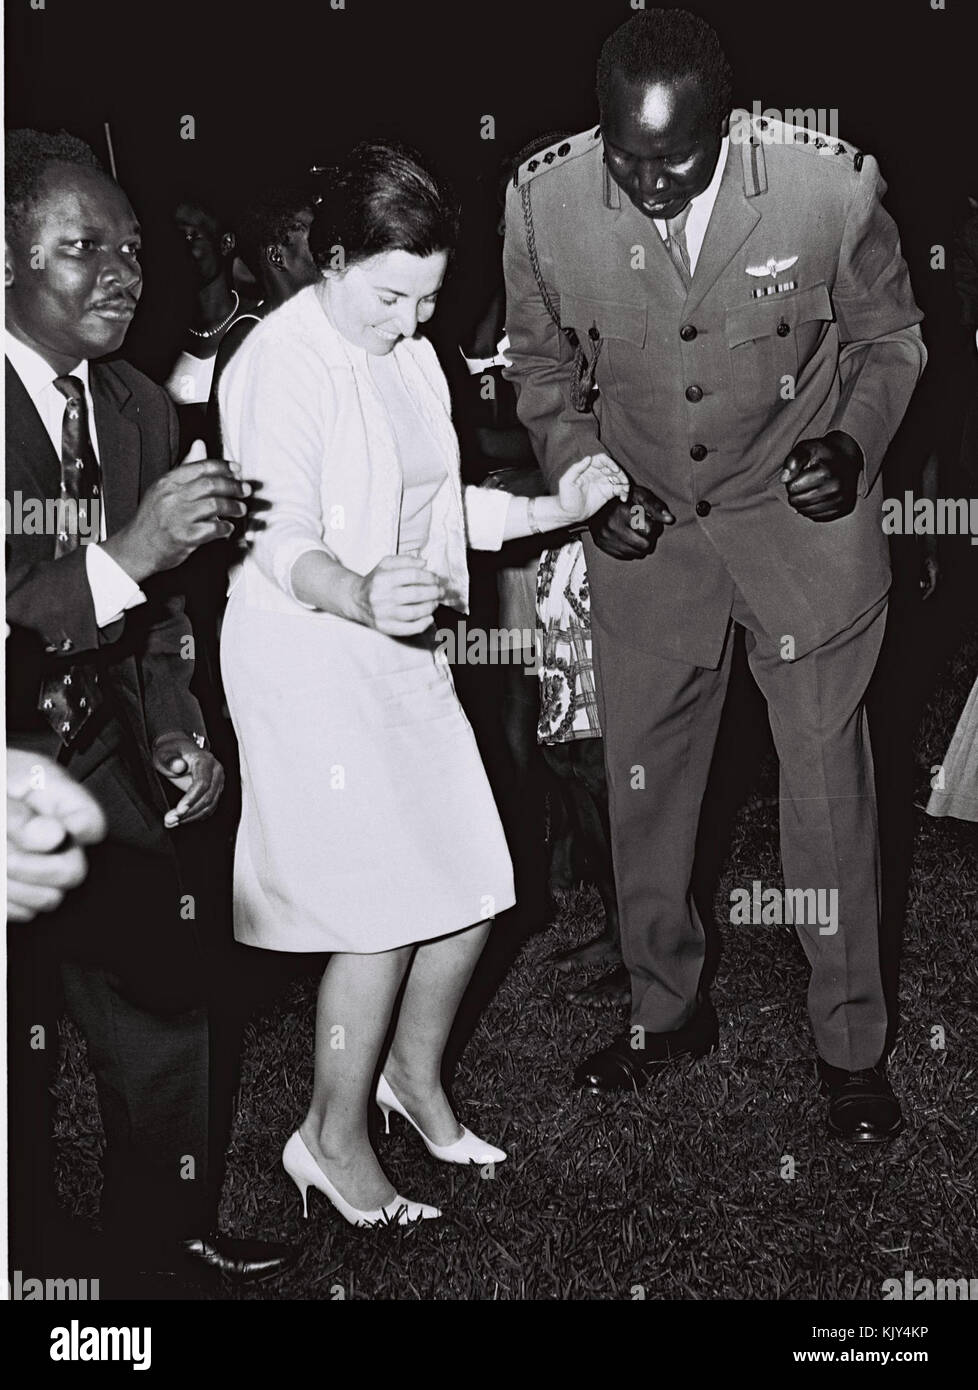 When the Israeli prime minister's wife took a twirl with Idi Amin